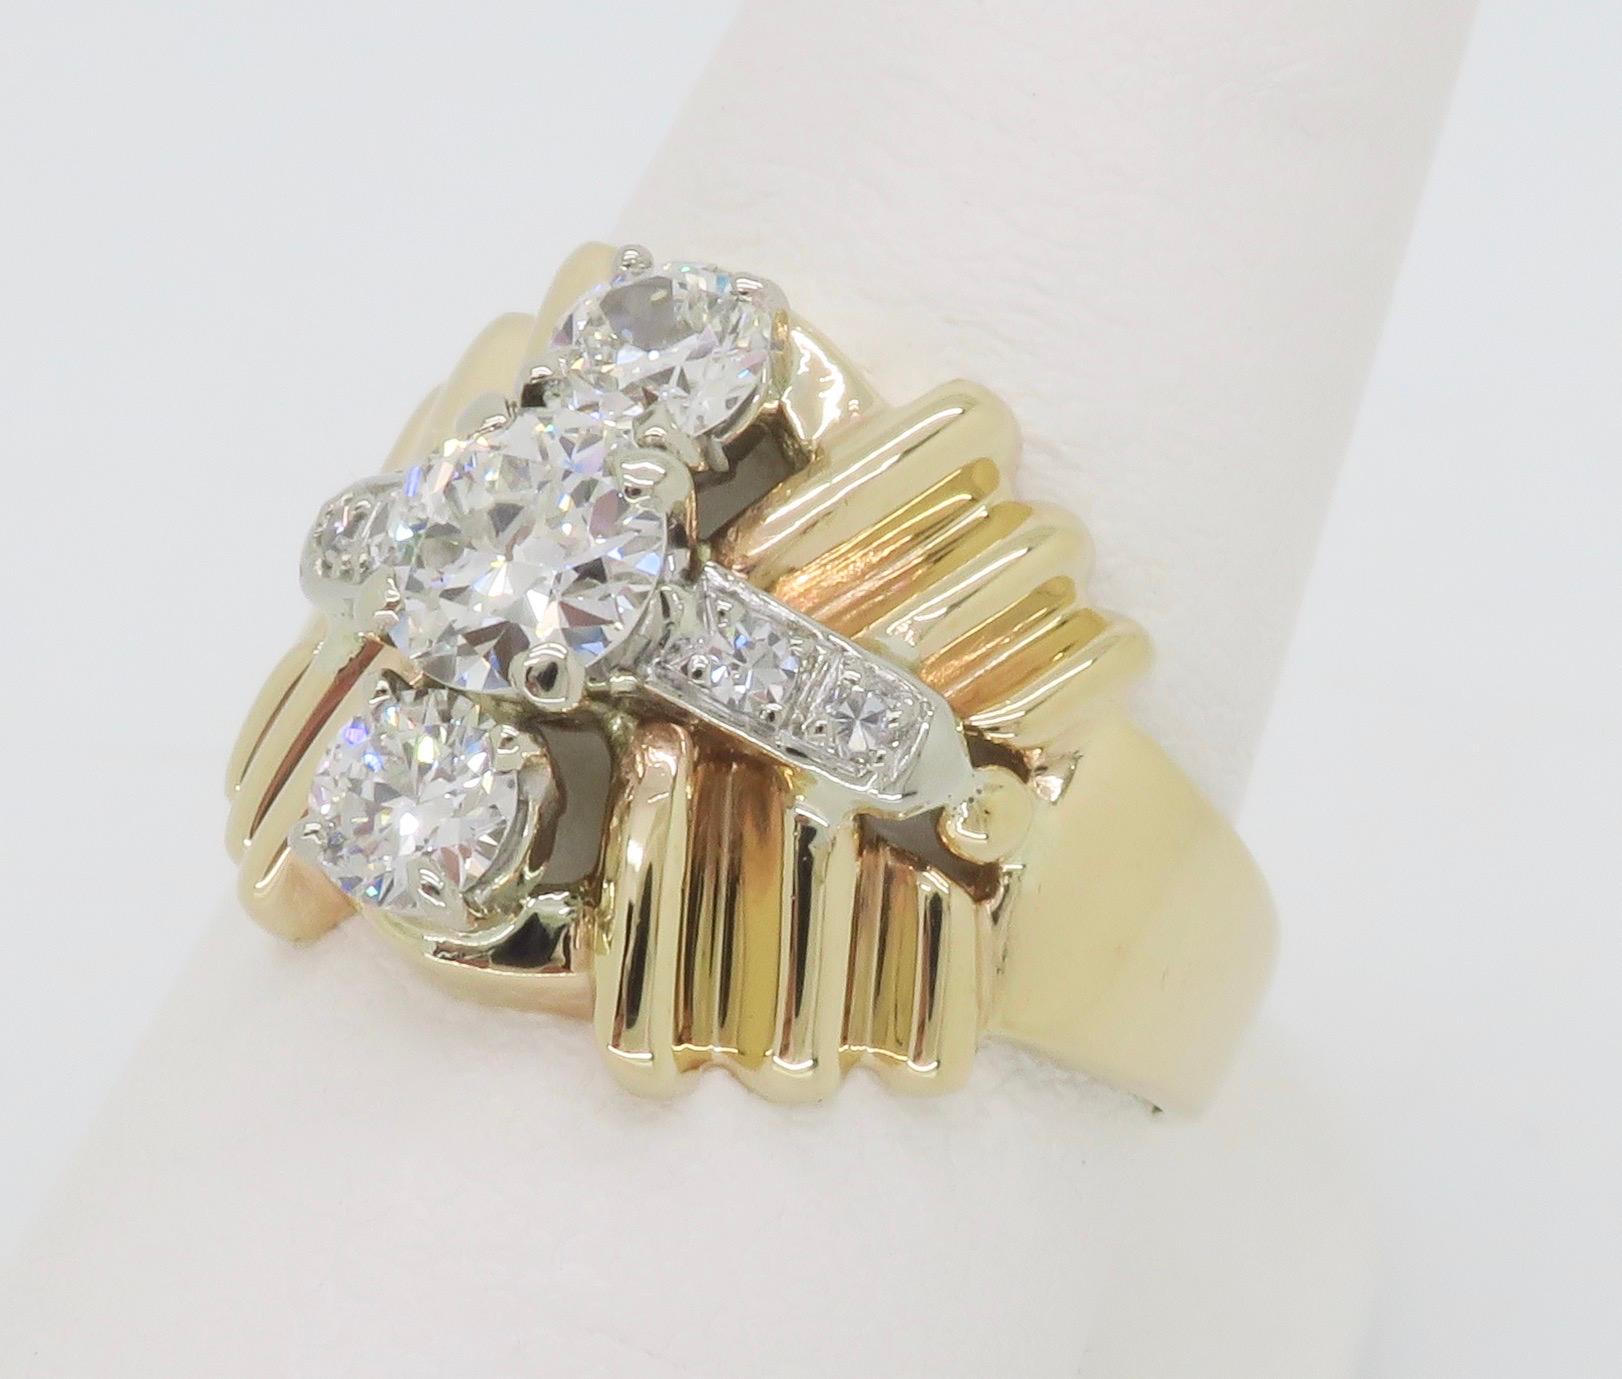 Unique vintage cluster ring crafted in 14k yellow gold. 

Center Diamond Carat Weight: Approximately .50CT
Center Diamond Cut: Old European Cut 
Center Diamond Color: H
Center Diamond Clarity: VS2
Total Diamond Carat Weight: .83CTW
Metal: 14k Yellow